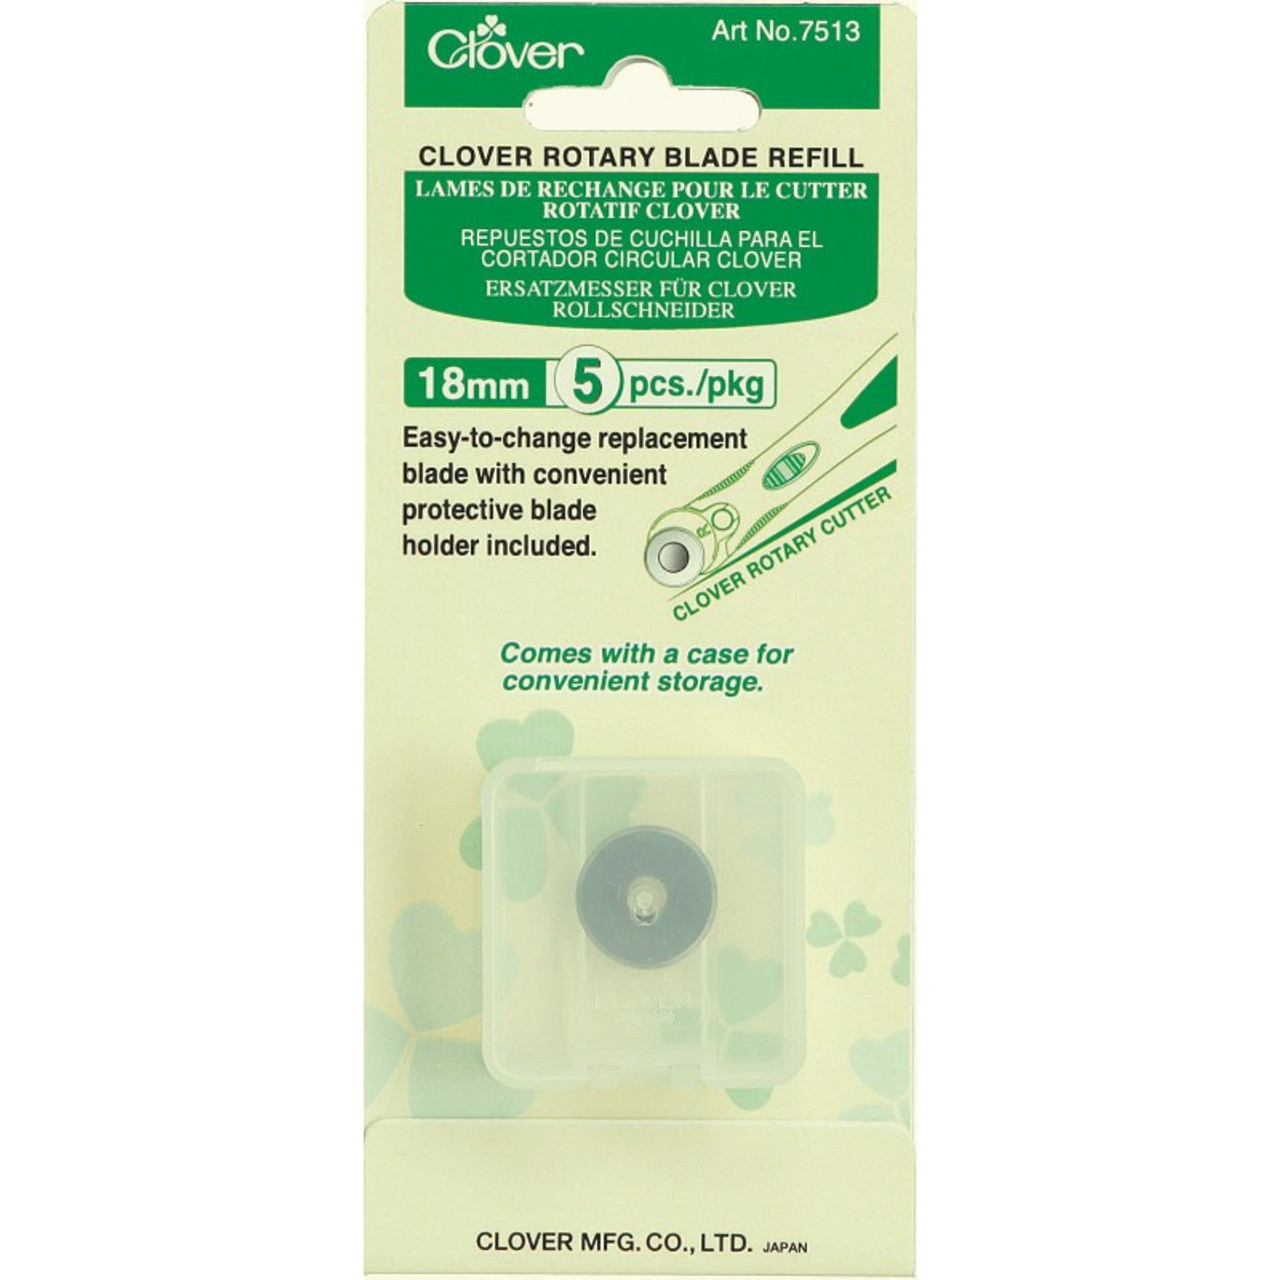 Clover 18mm Rotary Blades Refill